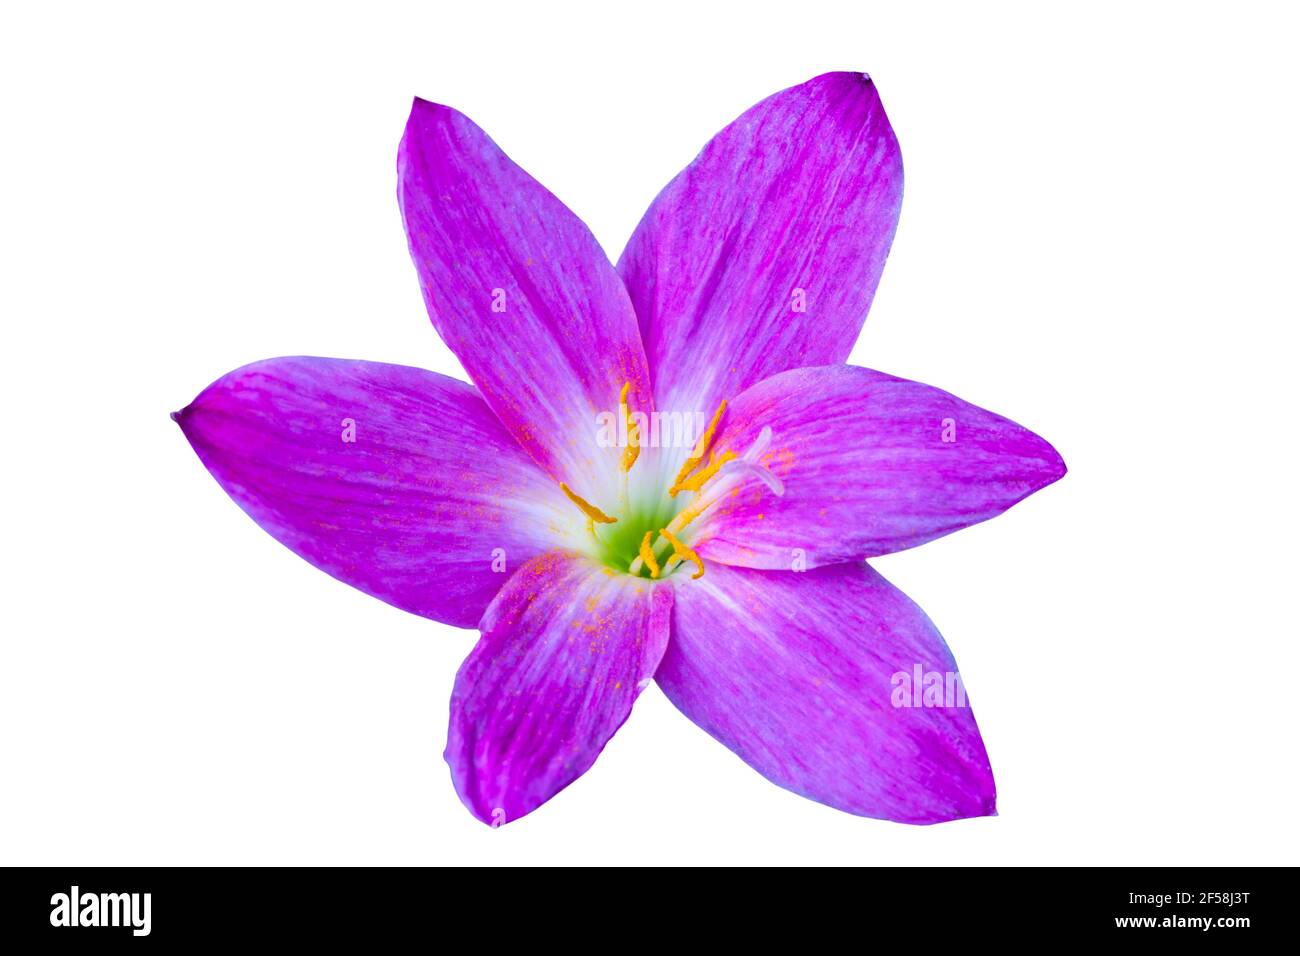 Close up pink-purple Zephyranthes flower isolated white background.Saved with clipping path. Stock Photo